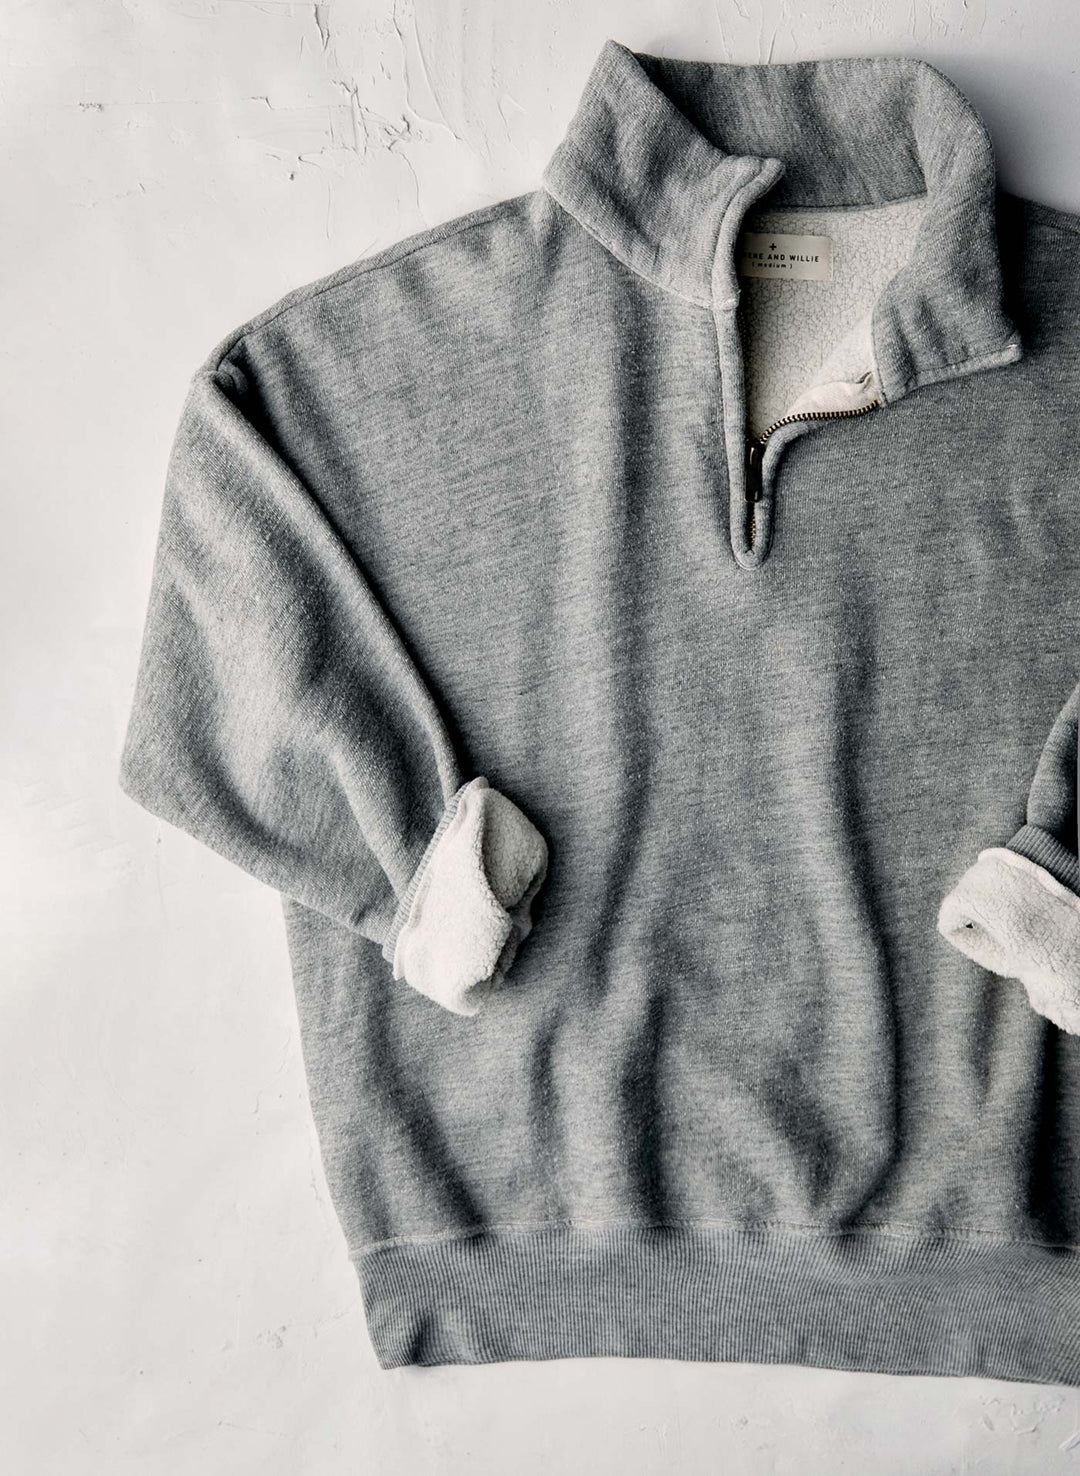 a grey sweater with a zipper